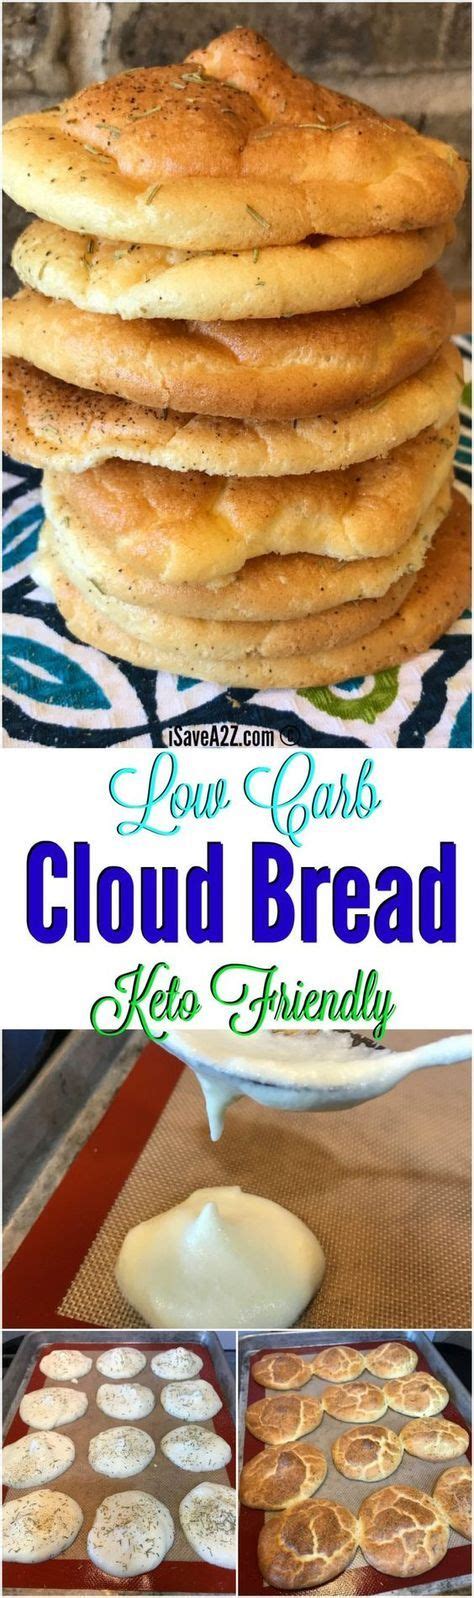 In a small bowl, whisk together the whey protein, baking powder, baking soda, cream of this naturally keto and low carb recipe was adapted to fit the atkins program from several different recipes. Low Carb Cloud Bread Recipe Made with Baking Soda | Recipe ...